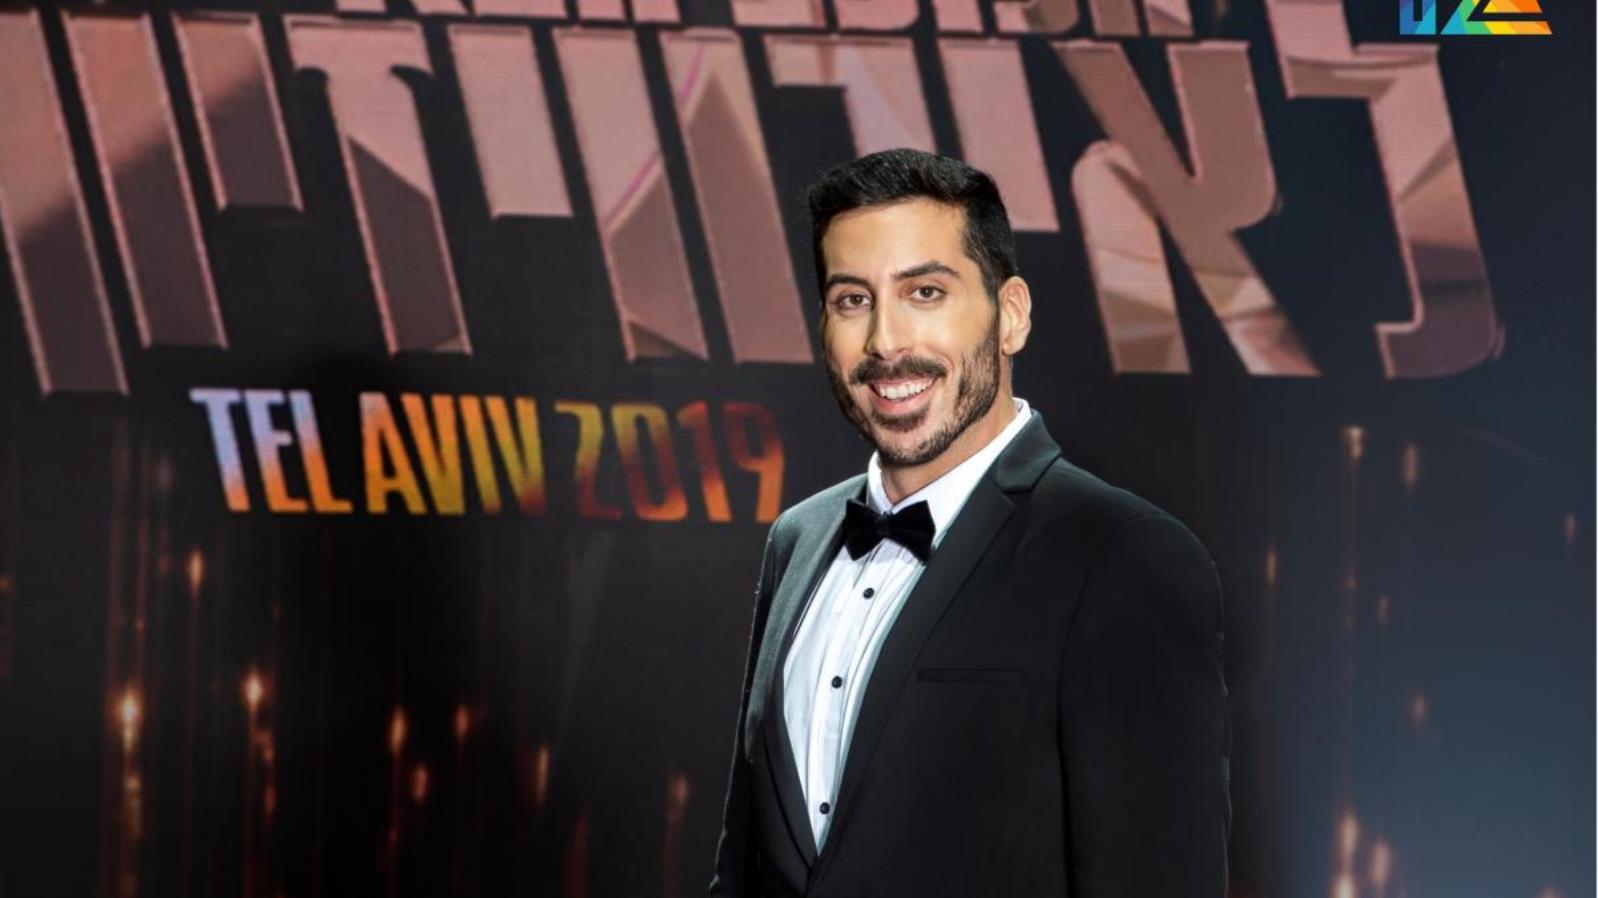 Kobi Marimi will represent Israel at the 2019 Eurovision Song Contest. Photo by Ronen Akerman/Rising Star for Eurovision